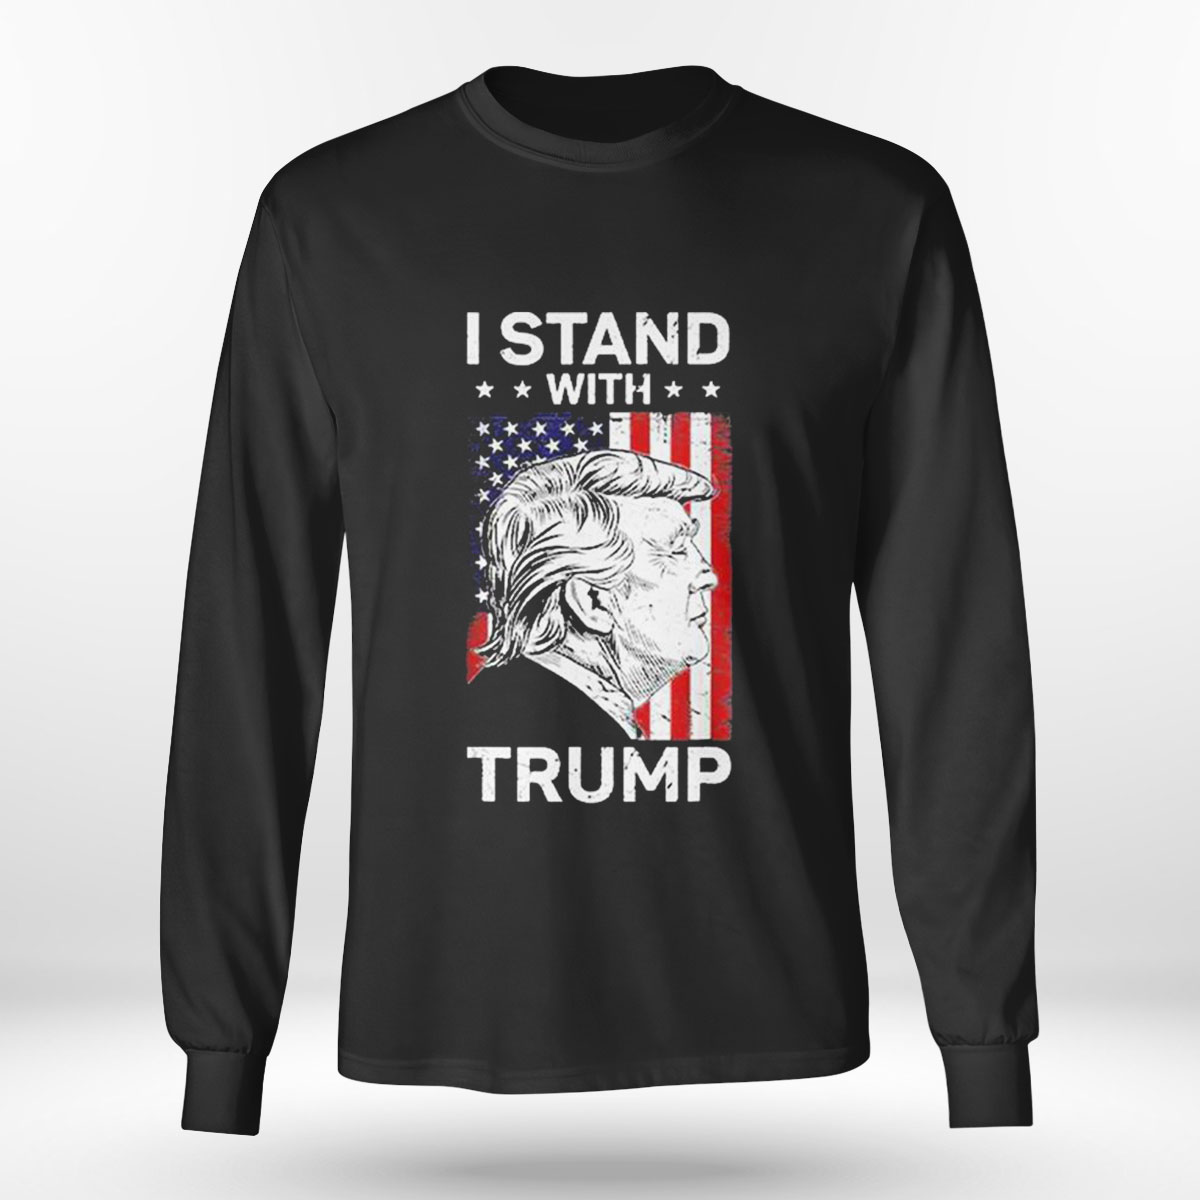 I Stand With Trump T-shirt